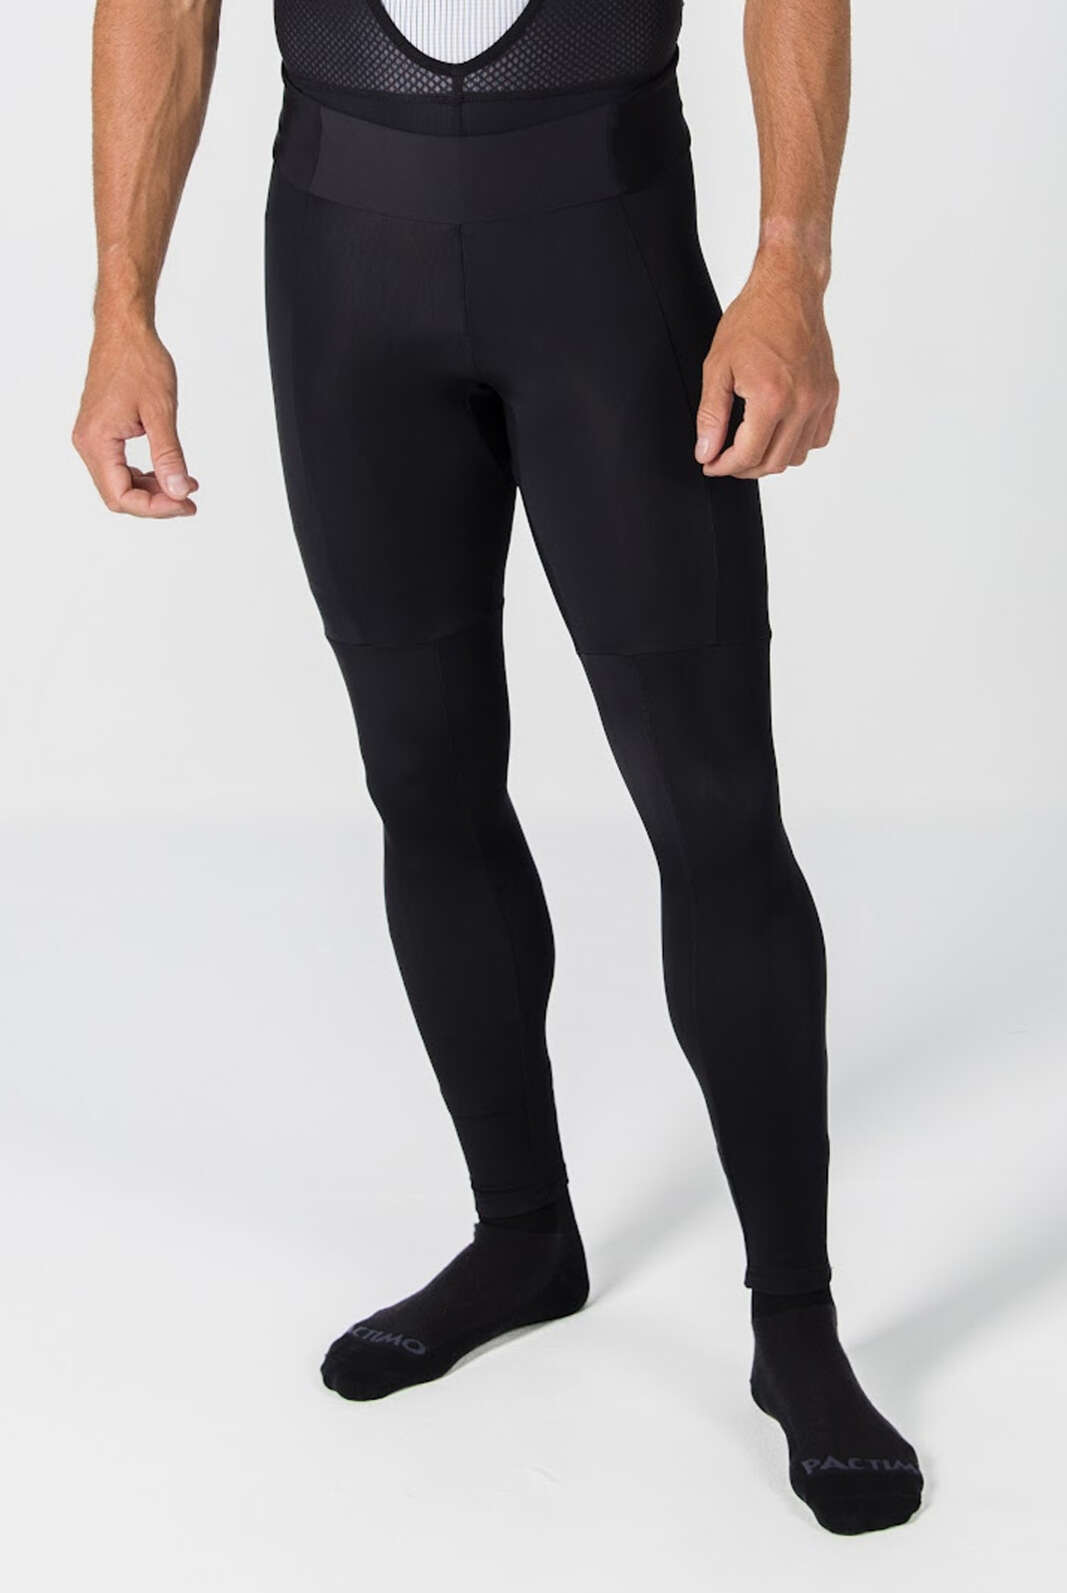 Men's Thermal Cycling Tights, Cool & Cold Weather